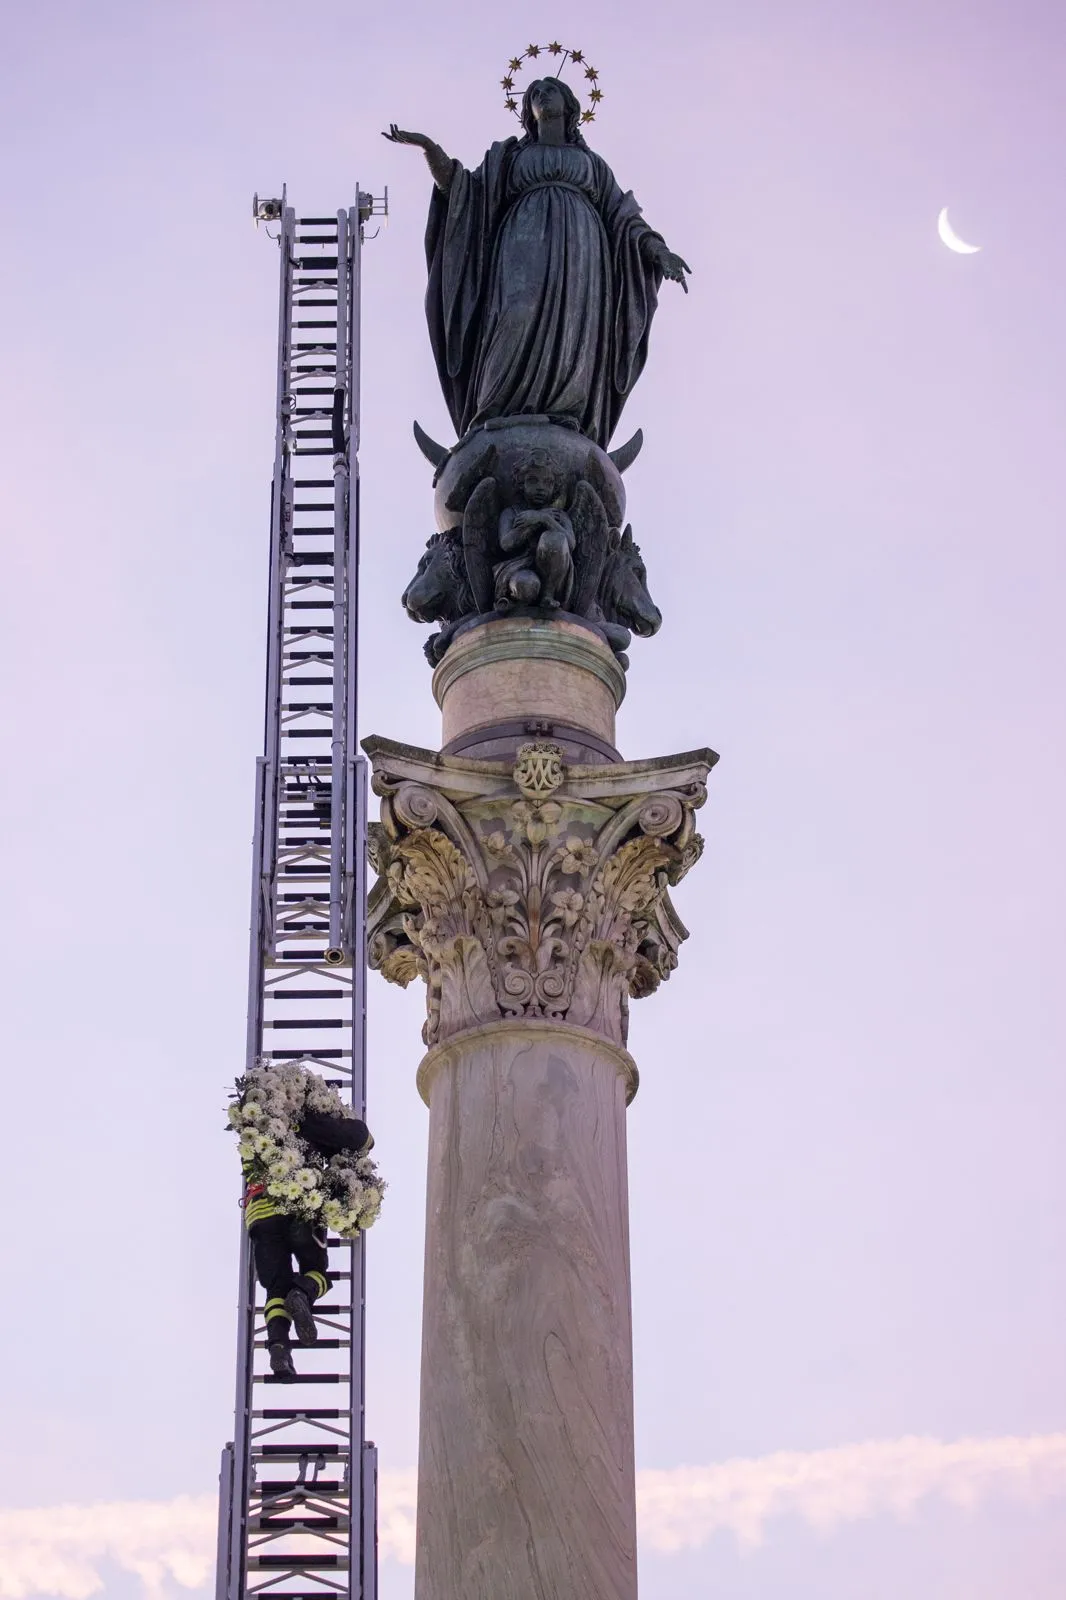 A firefighter scales a long ladder to the top of a nearly 40-foot-high column to pay tribute at dawn to the Blessed Virgin with a wreath of flowers on Dec. 8, 2023. Credit: Daniel Ibaniez/CNA